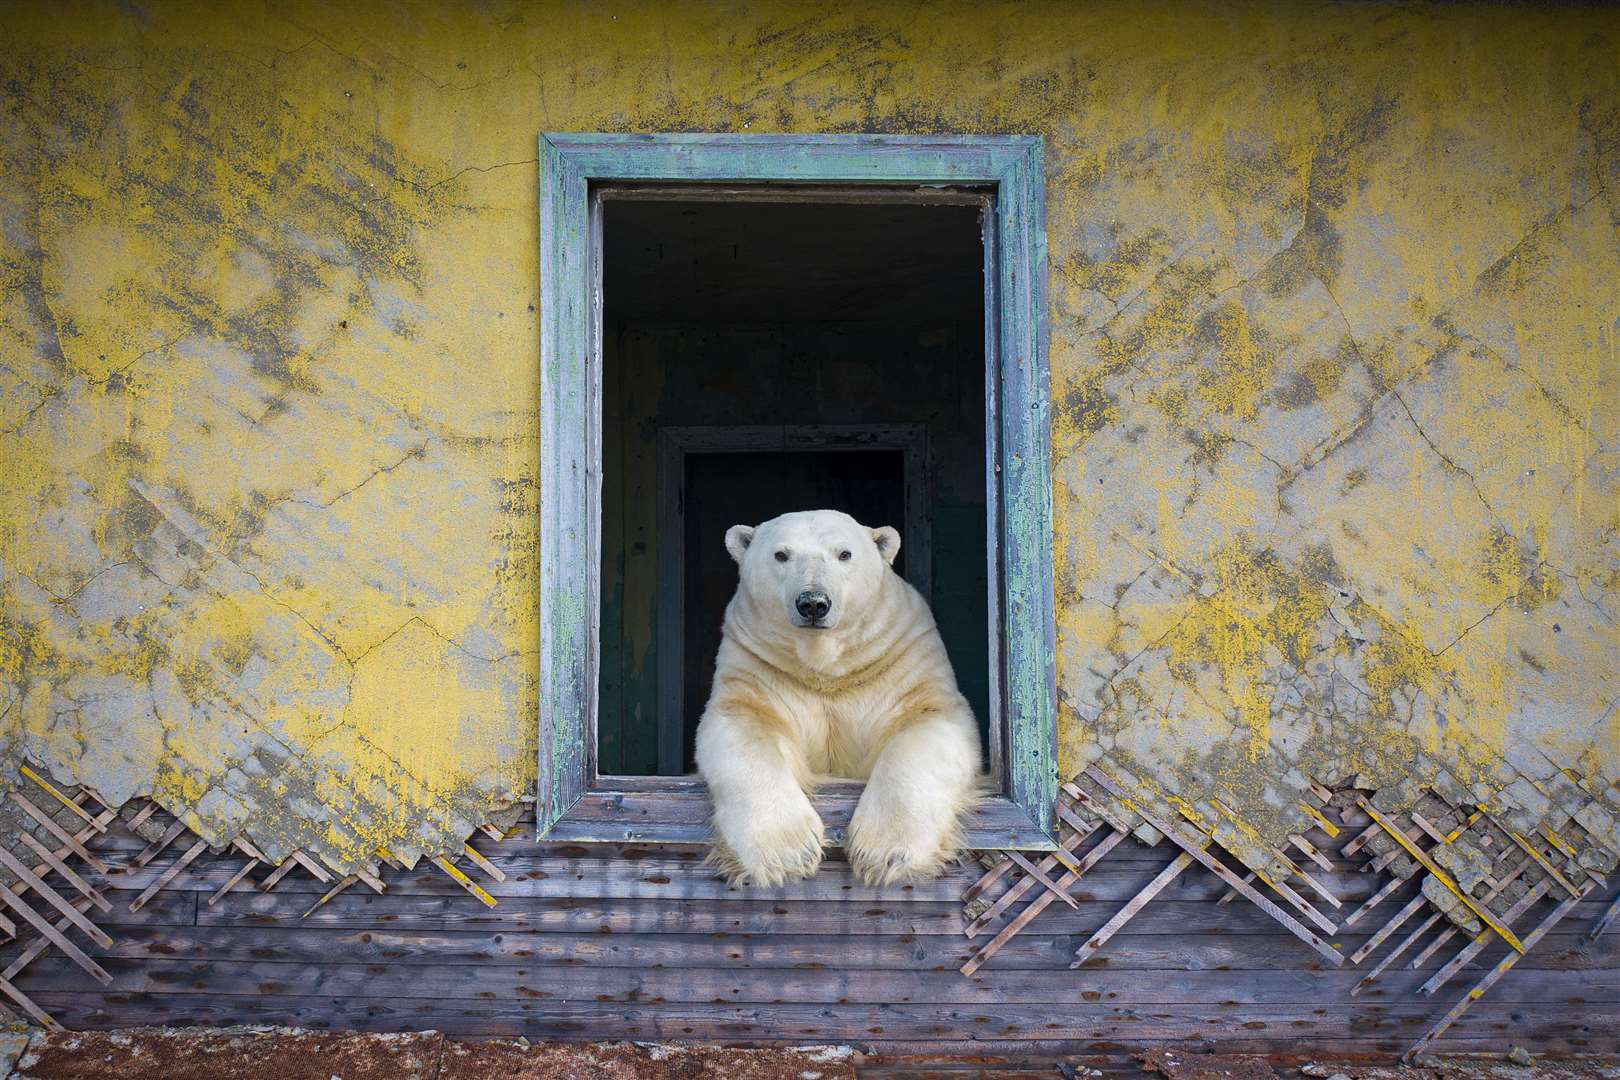 Polar frame by Dmitry Kokh, which has been highly commended in the Animal Portraits category at the Wildlife Photographer of the Year competition (Dmitry Kokh/Wildlife Photographer of the Year)